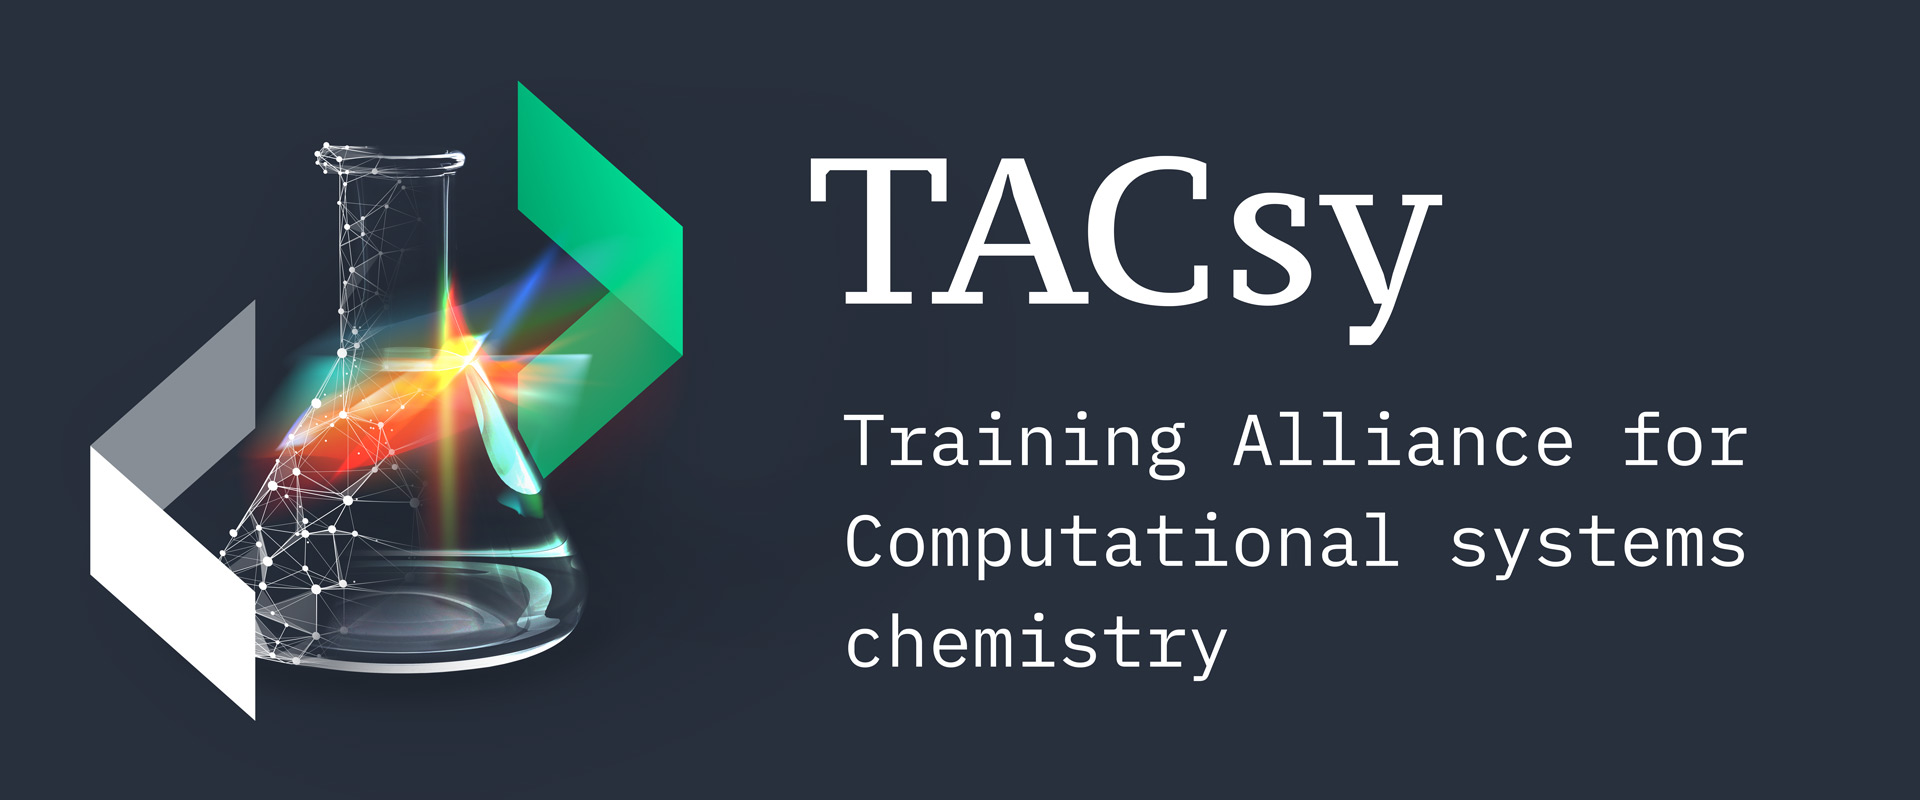 Training Alliance for Computational systems chemistry · TACsy